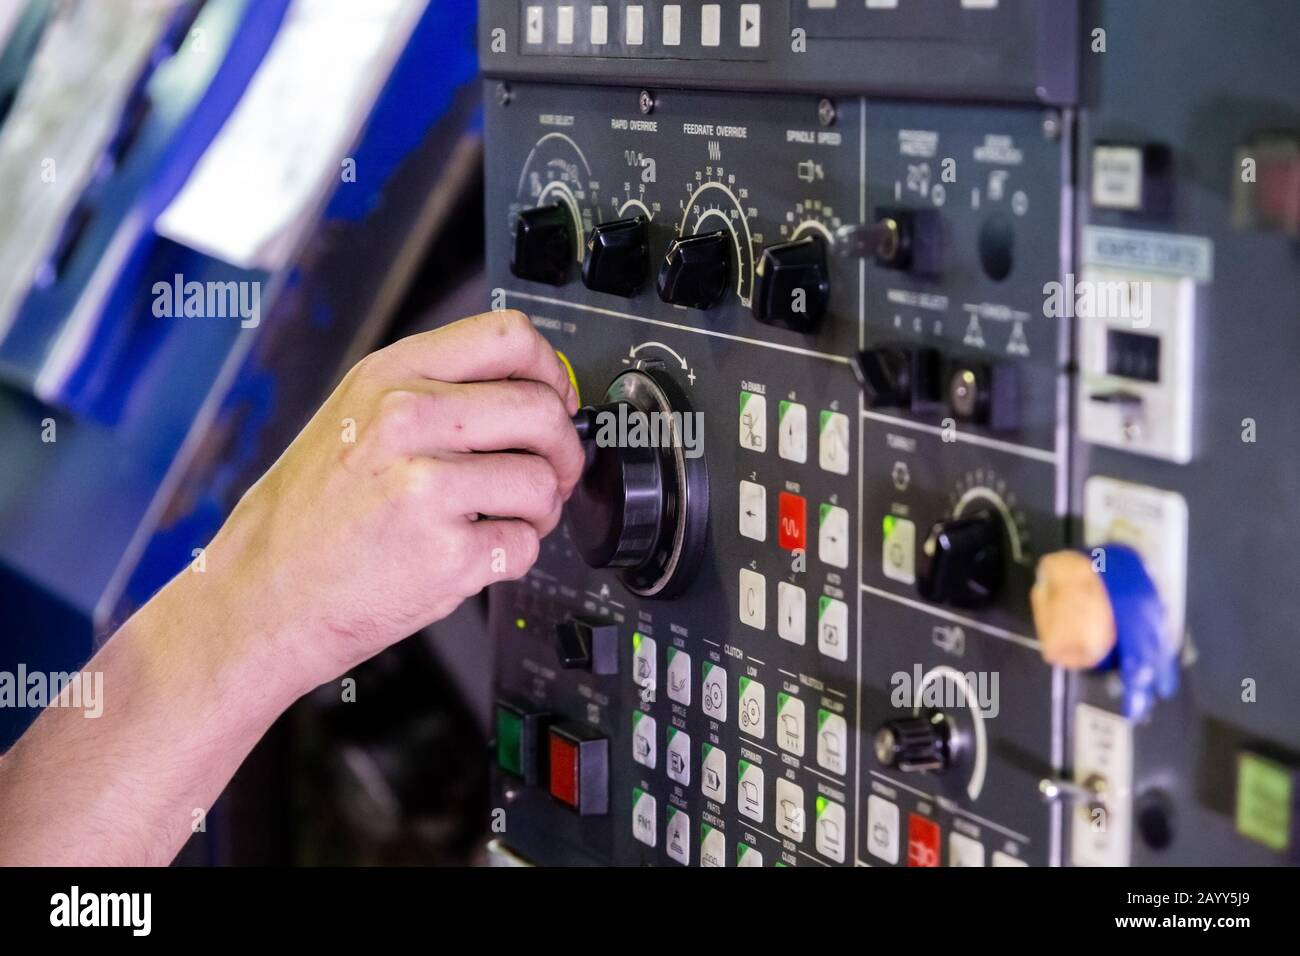 Operator hand spinning jog handle on CNC machine control panel. Close-up with selective focus and blur. Stock Photo